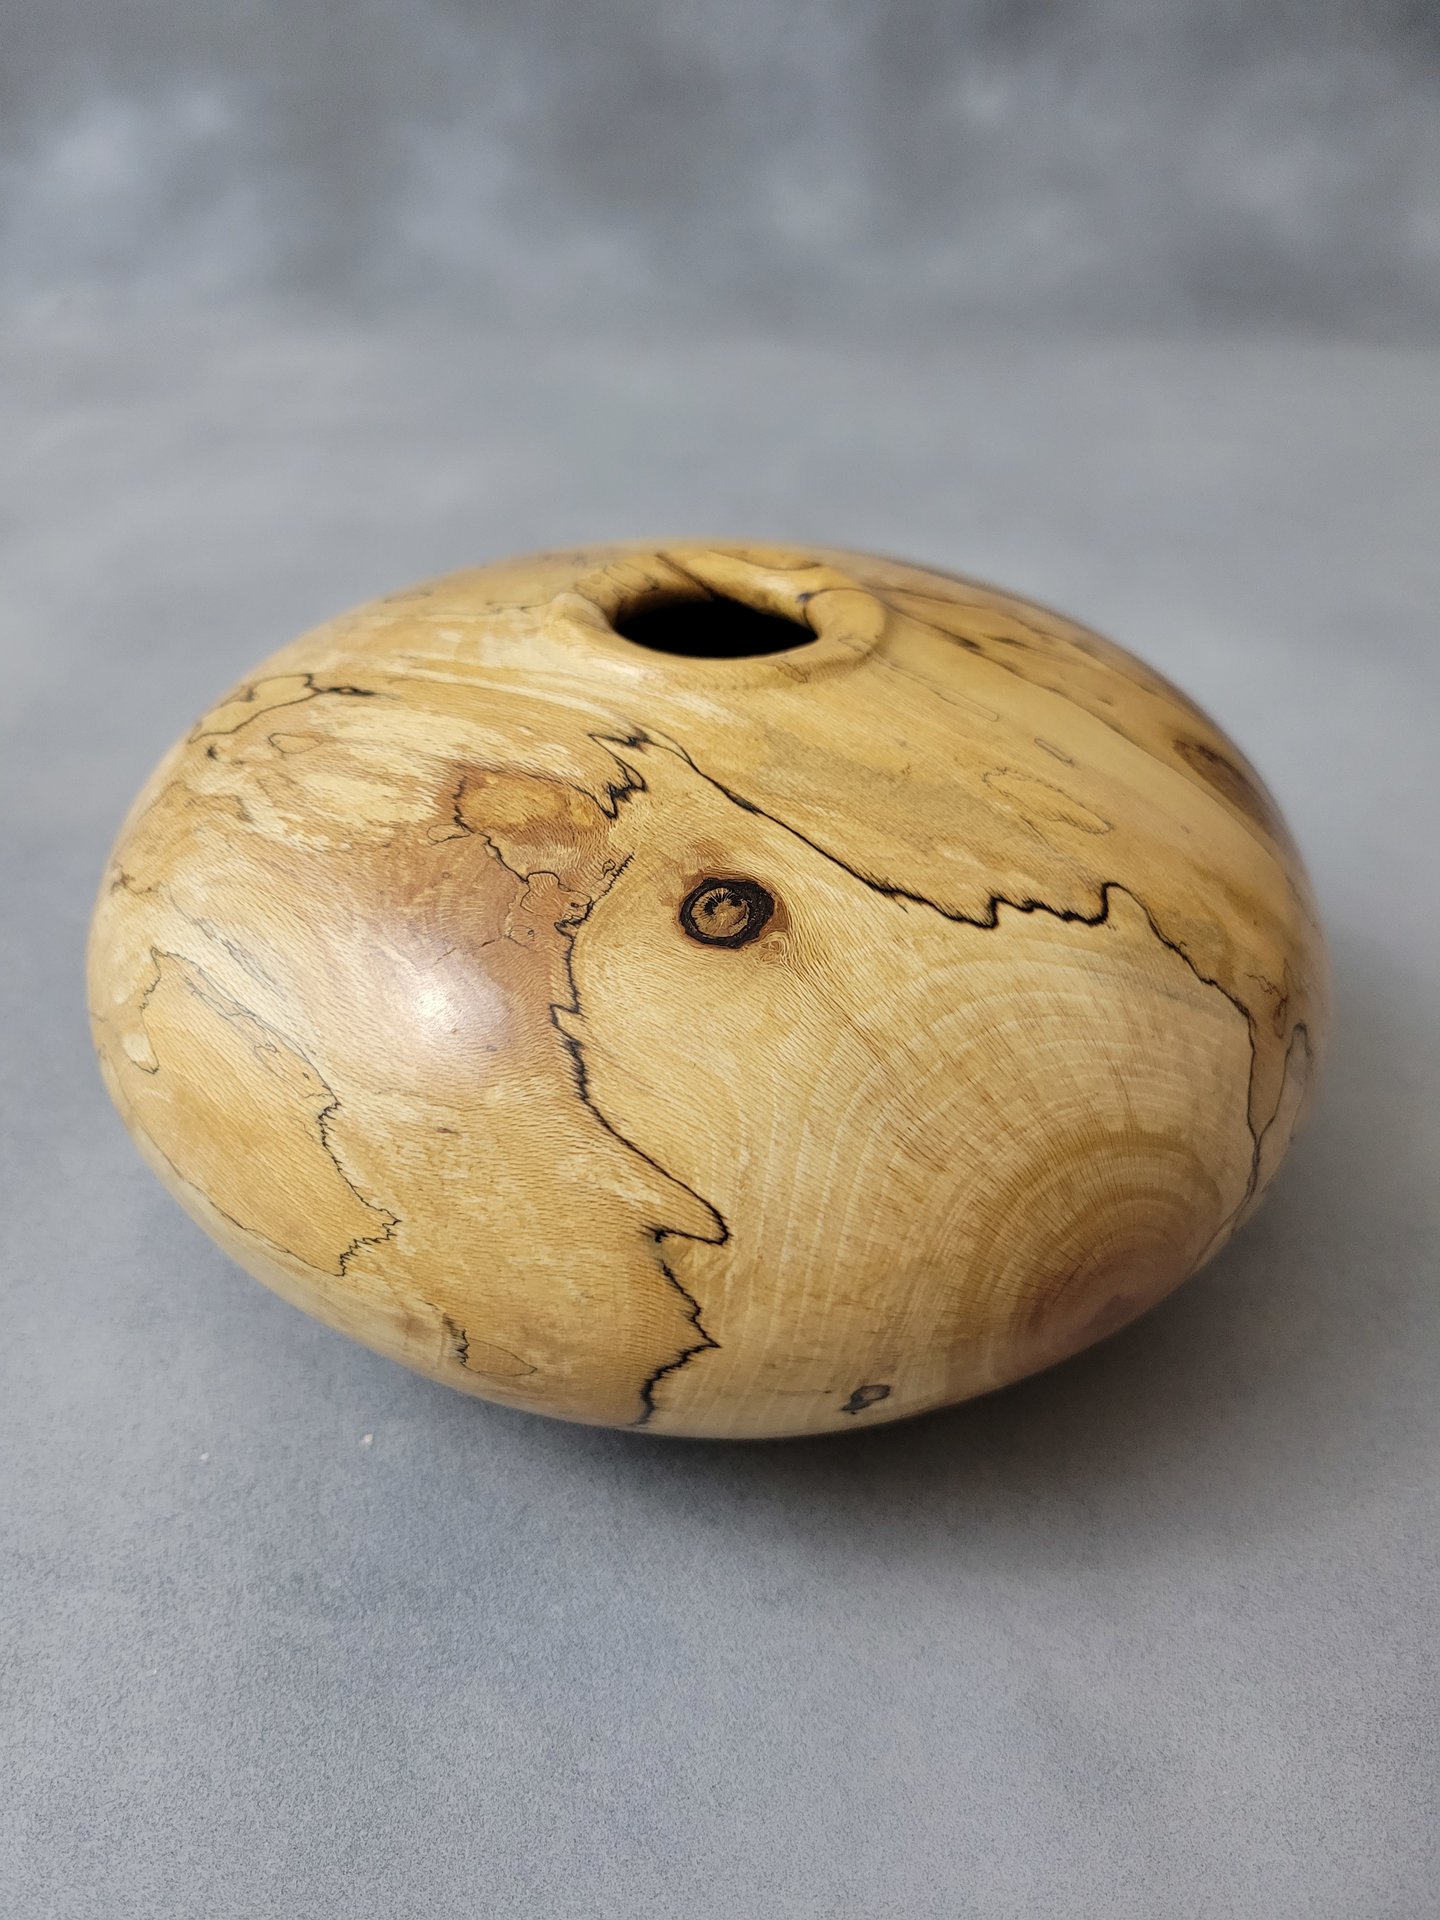 Spalted sycamore hollow form